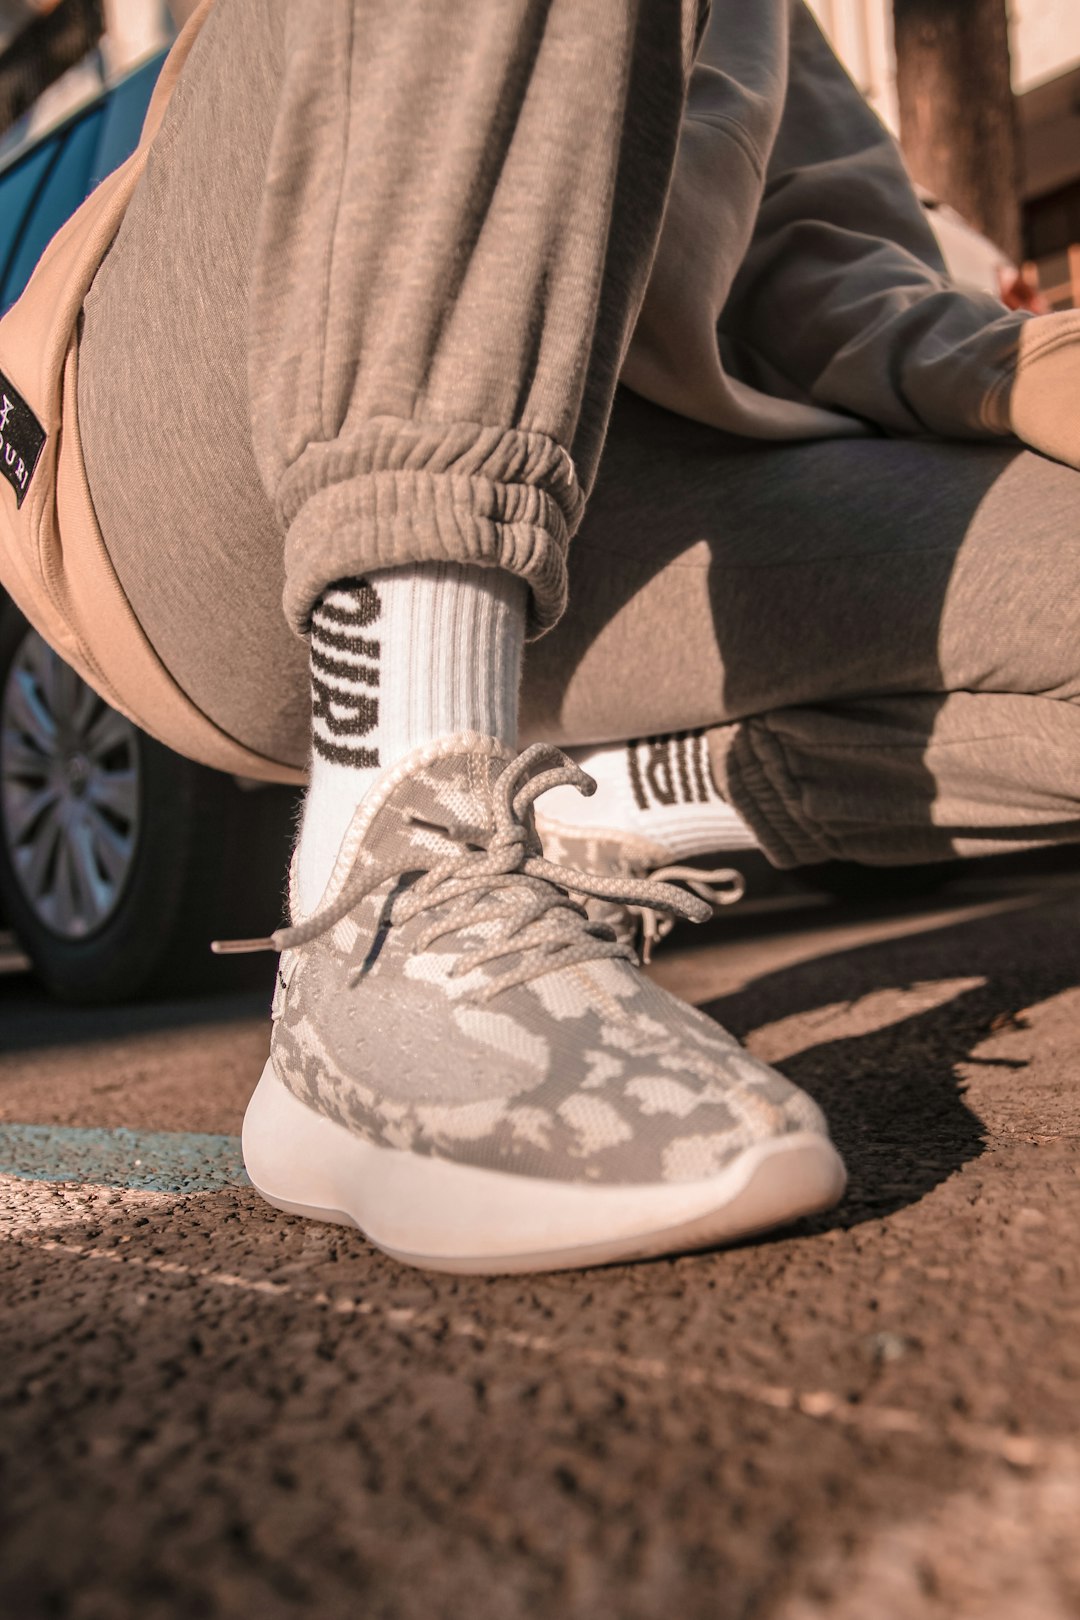 person wearing gray and white nike sneakers